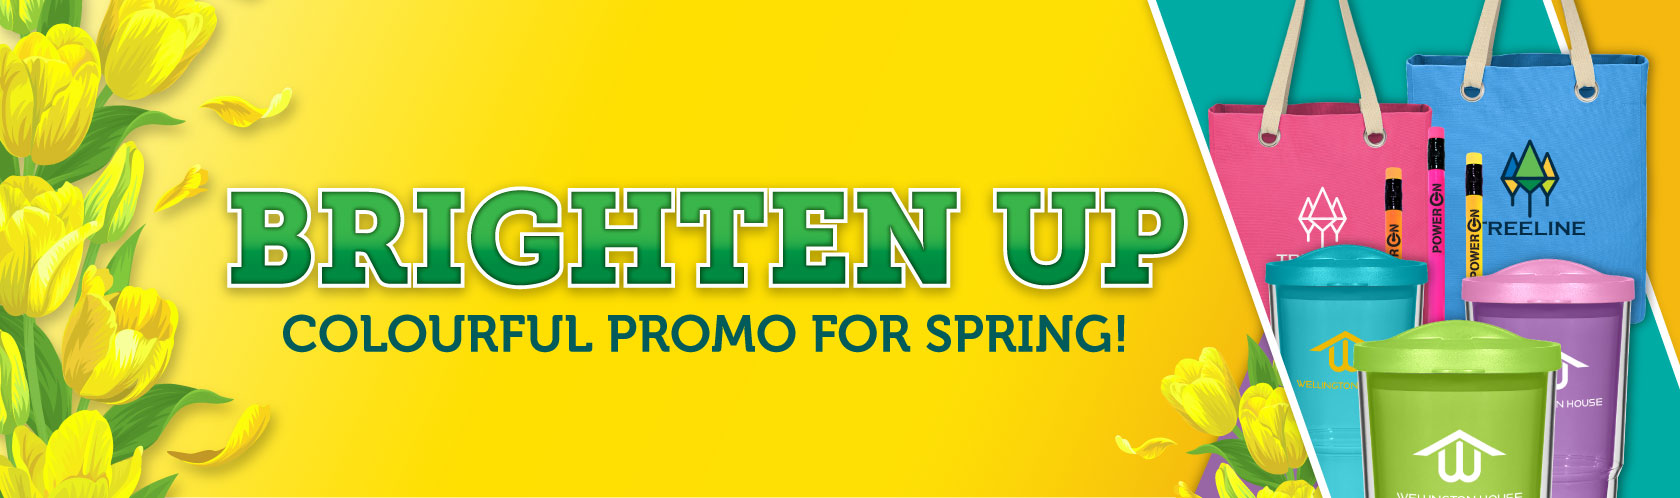 Brighten Up - Colourful Promo For Spring!